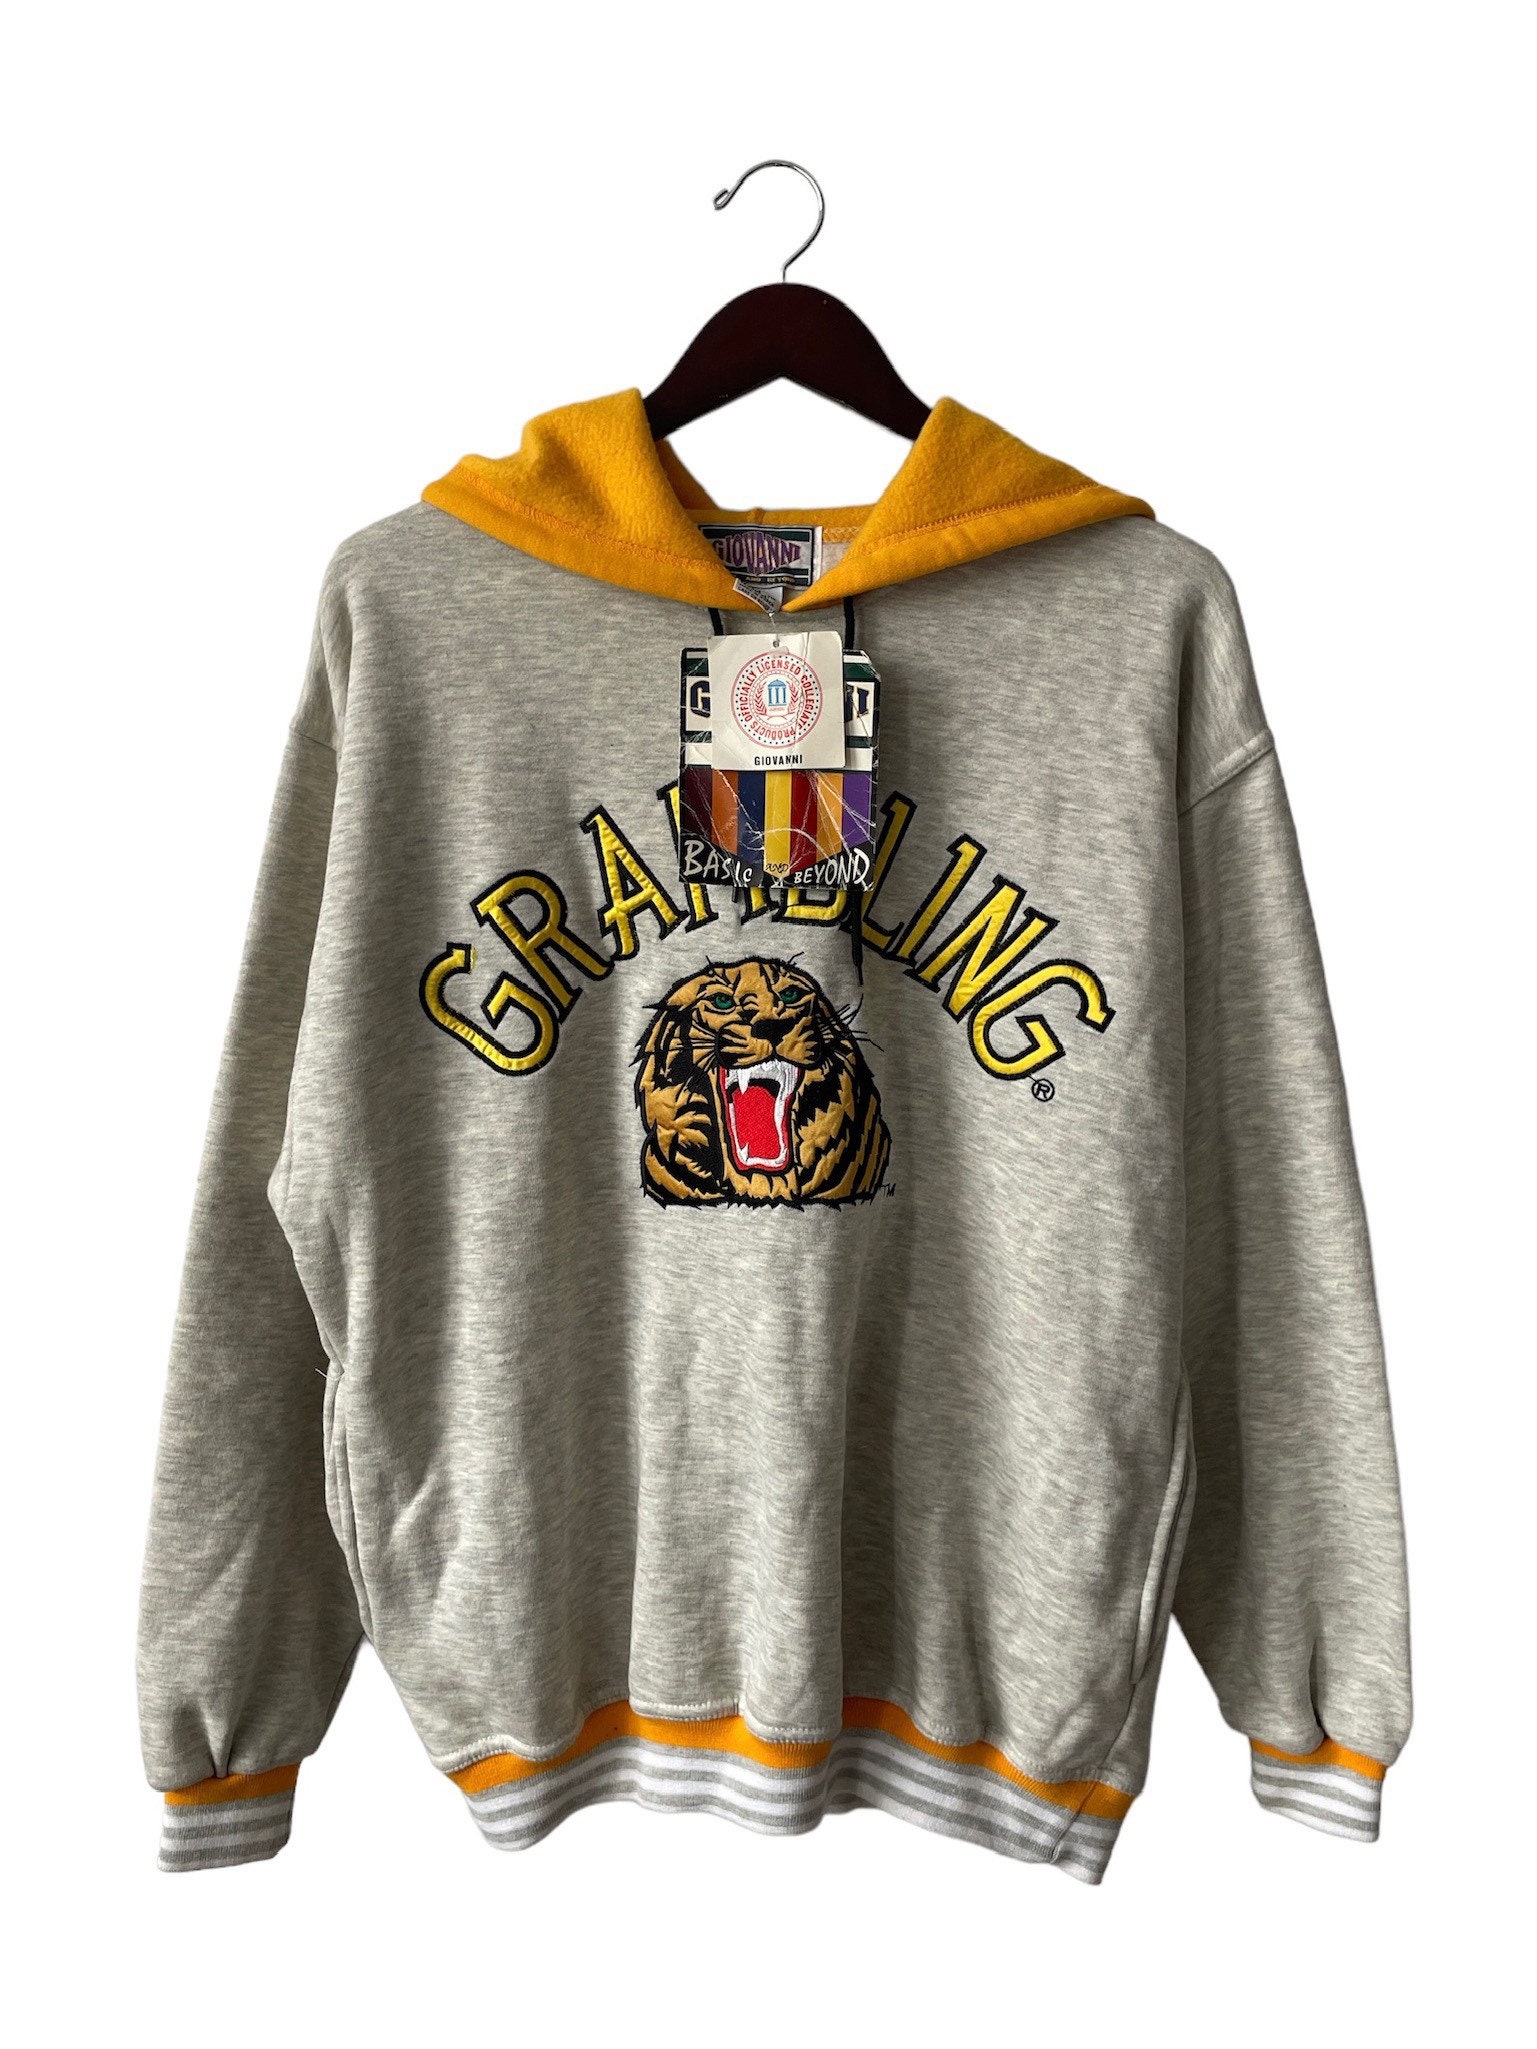  HBCU 90s Retro Pullover Hoodie : Clothing, Shoes & Jewelry